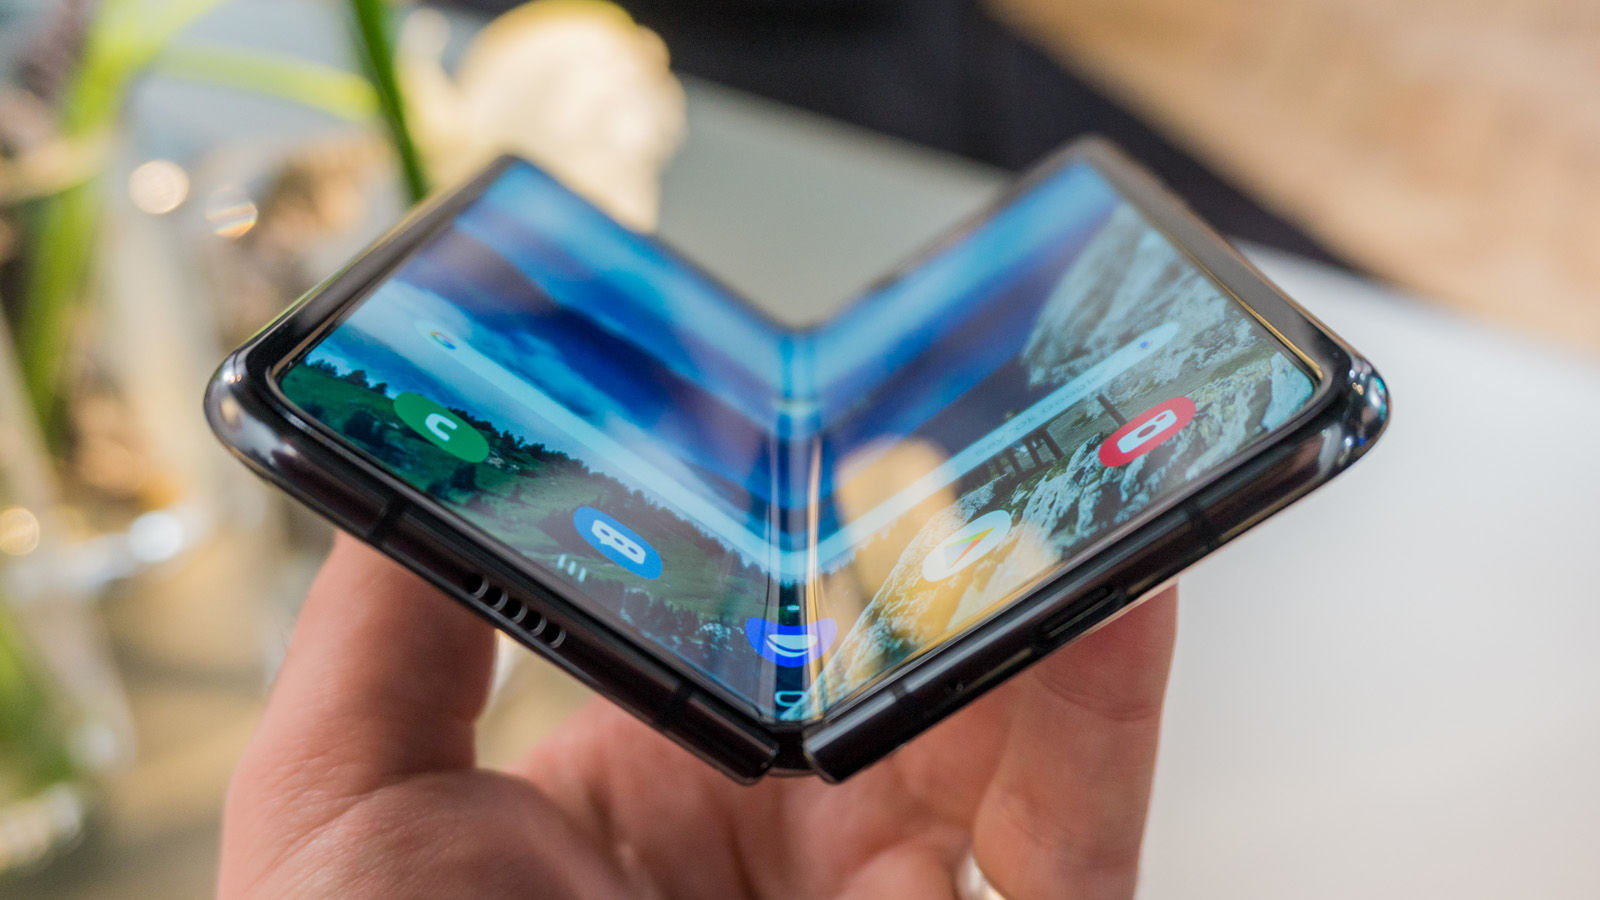 Samsung Delay The Release Of The Galaxy Fold Galaxy fold Release Date